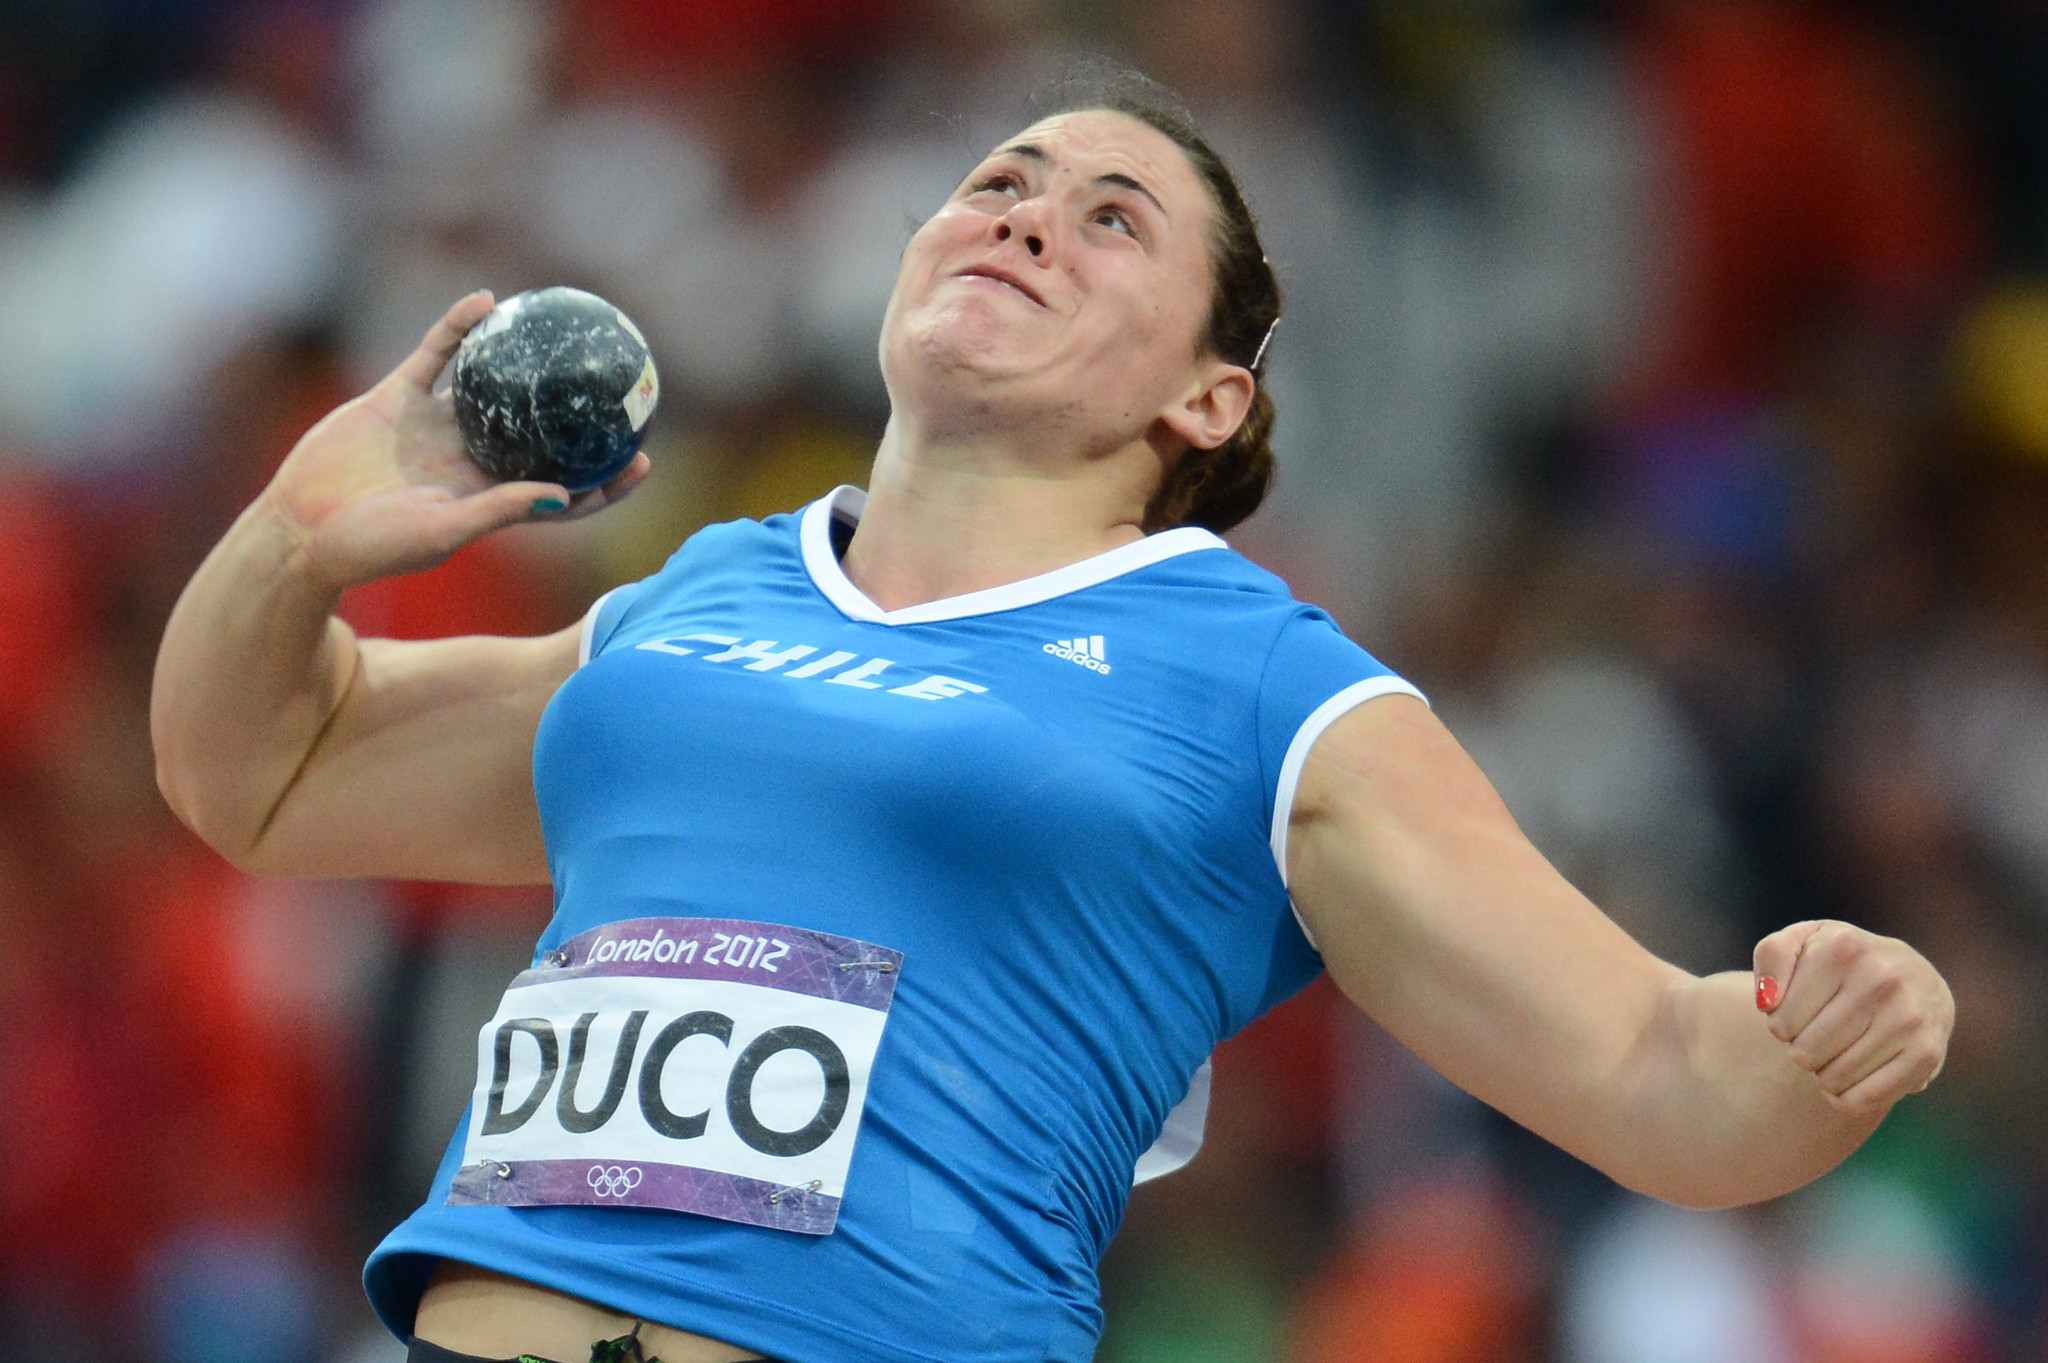 Chilean shot putter Natalia Duco, who is a mother, described the lactation room at Santiago 2023 as 